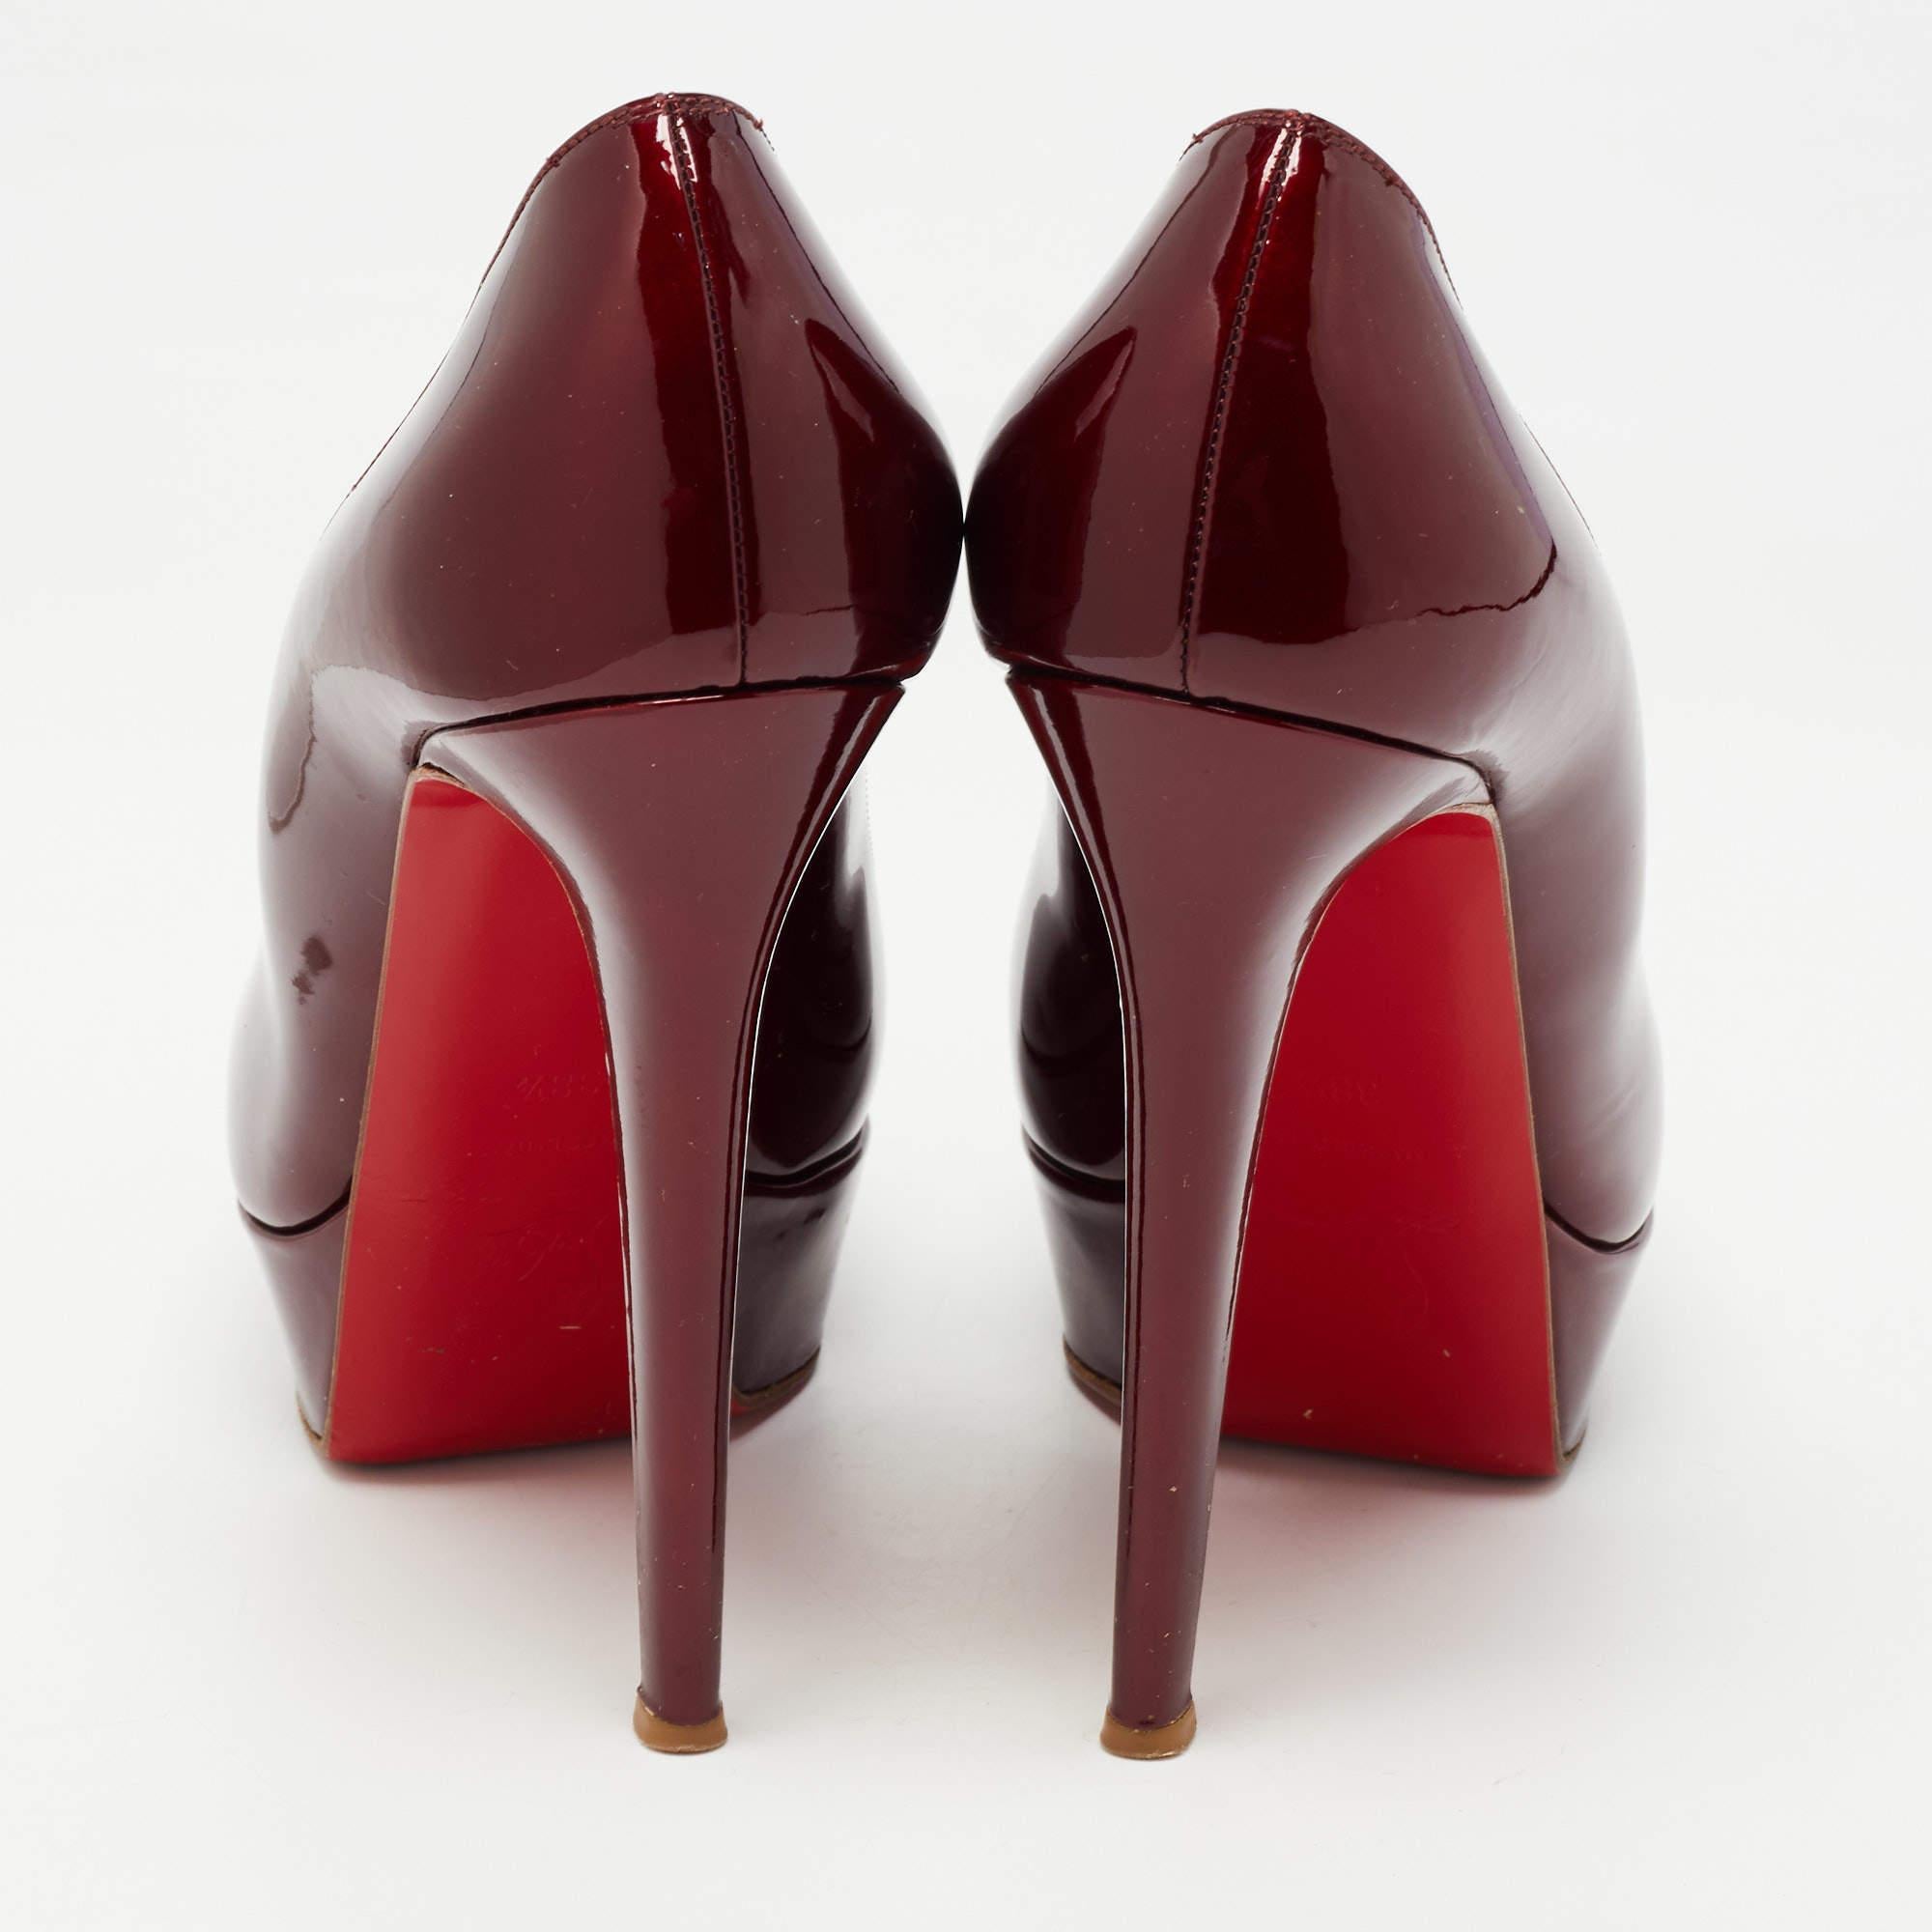 
Every flawless design of Christian Louboutin, like this pair of Bianca pumps, is the epitome of feminine style. Crafted from patent leather, its upper is balanced on 13cm heels and platforms. The signature red-lacquered sole of these shoes marks